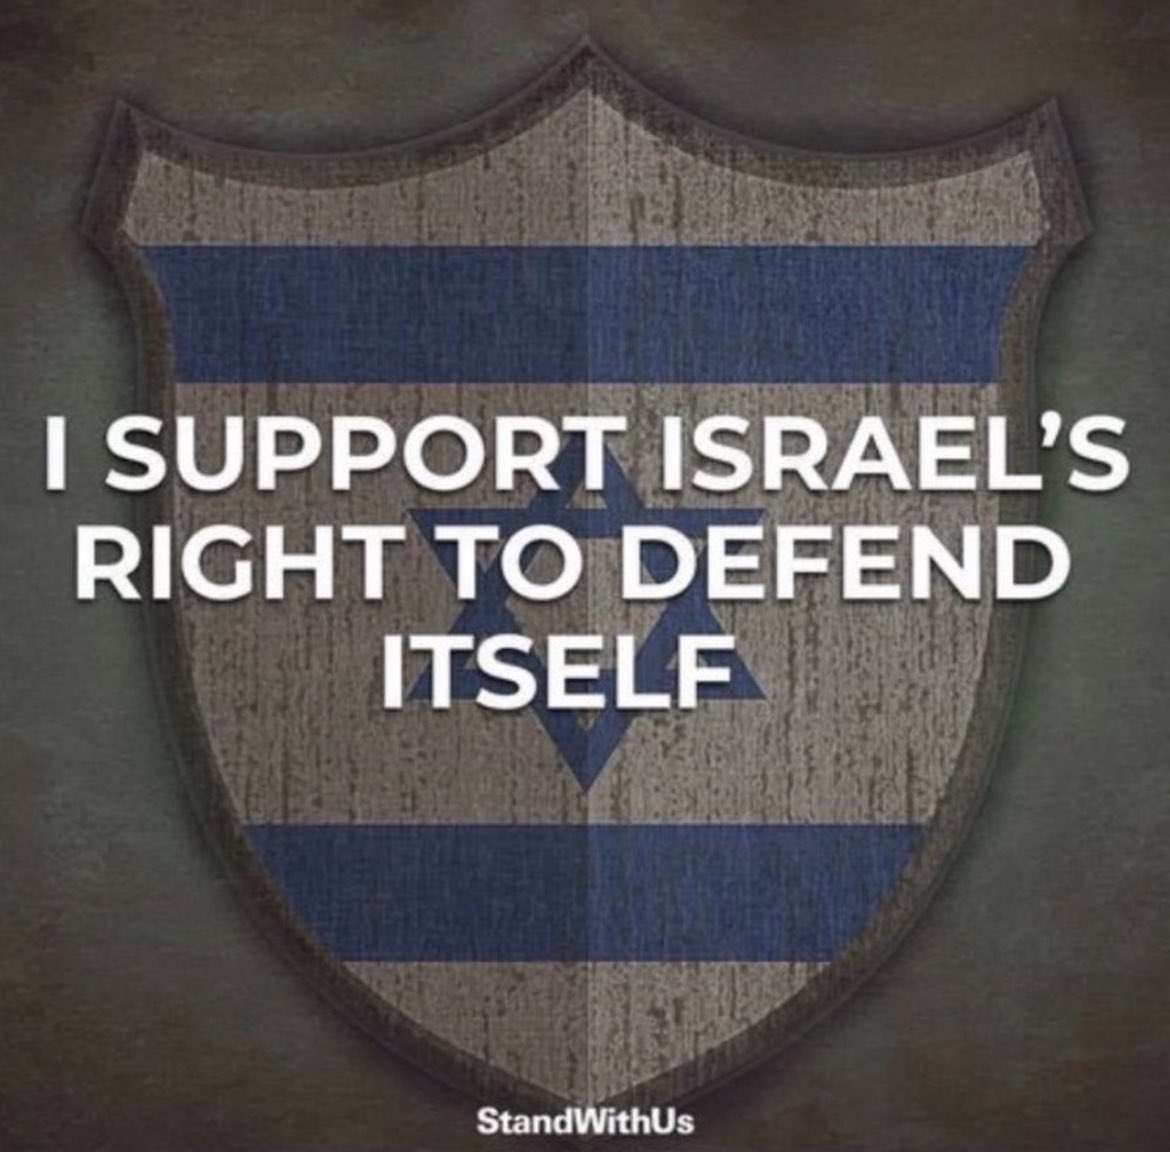 Israel should NOT stand in trial because it decided to defend itself. I support Israel’s right to defend itself. Do you?